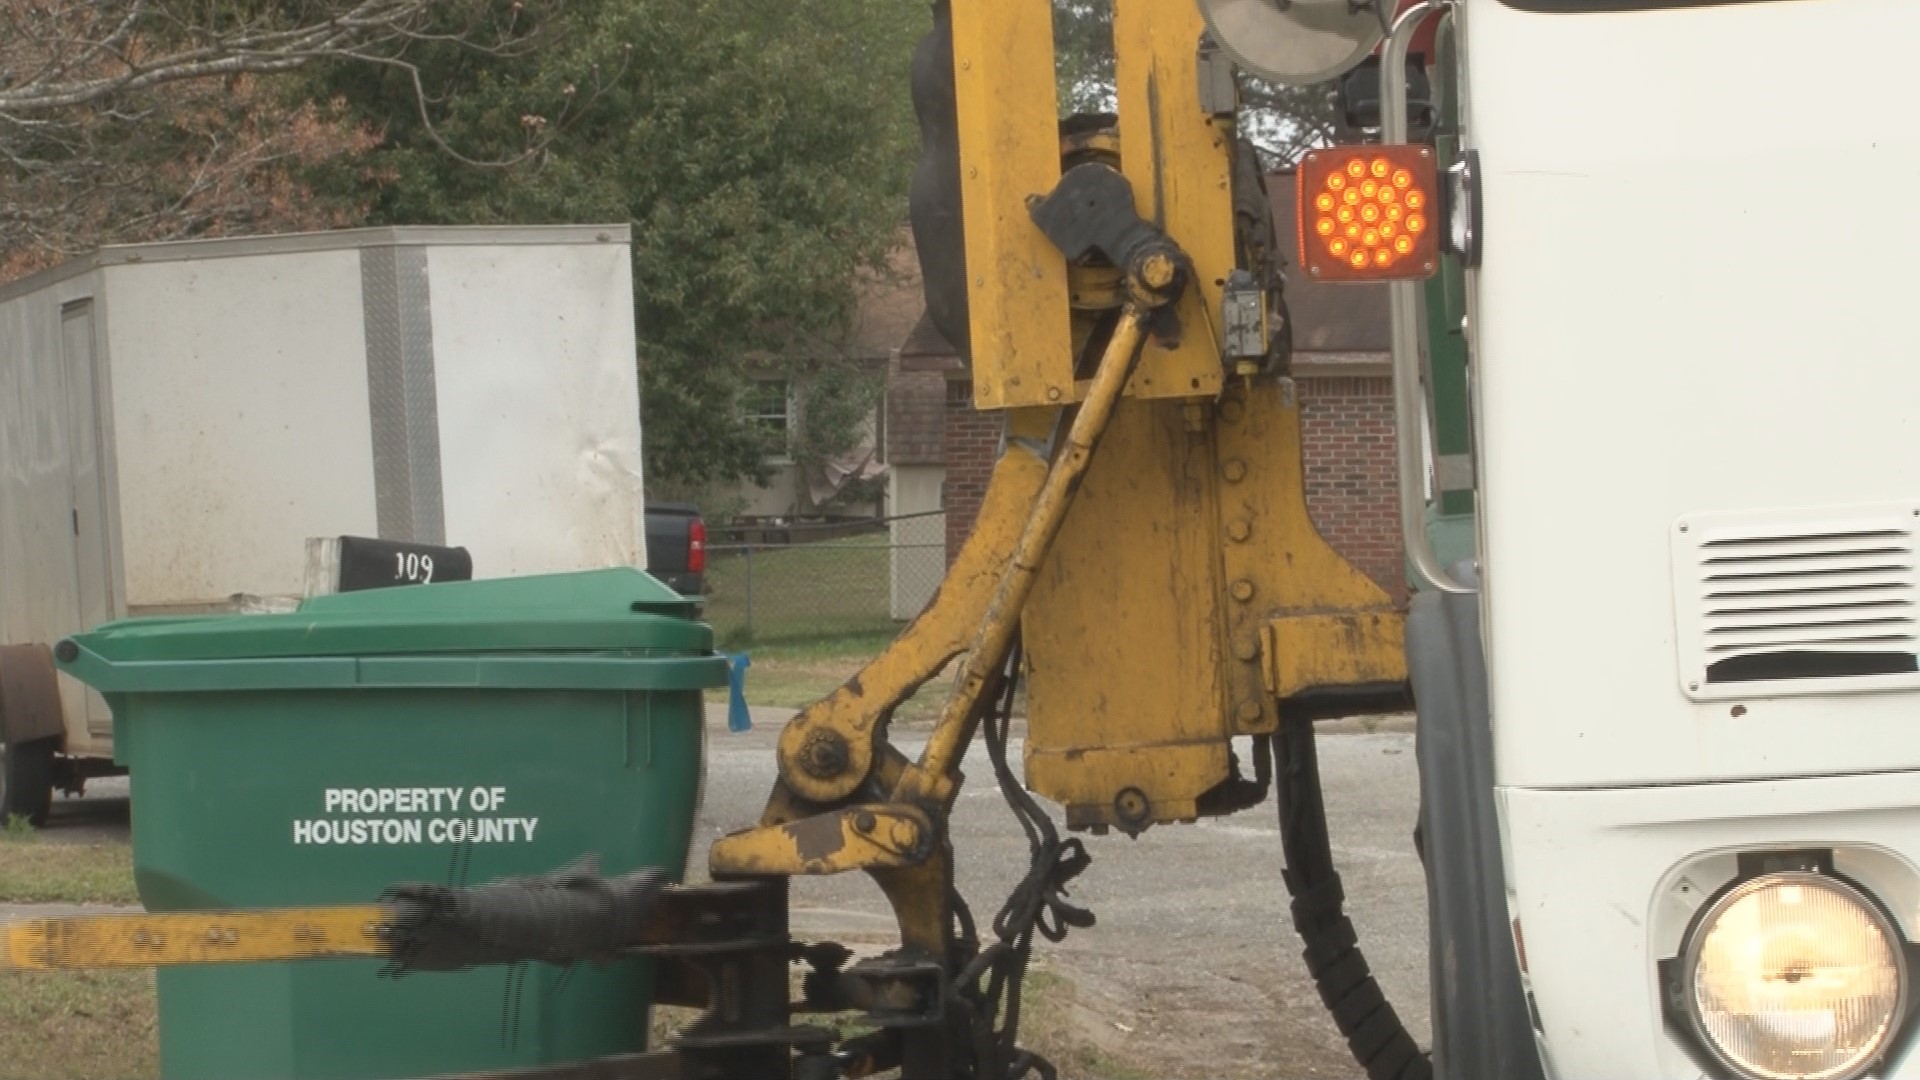 The money that was bridging the trash gap will now go to fire staff and service. The last time an increase happened was in 2019, going from $11 to $13.